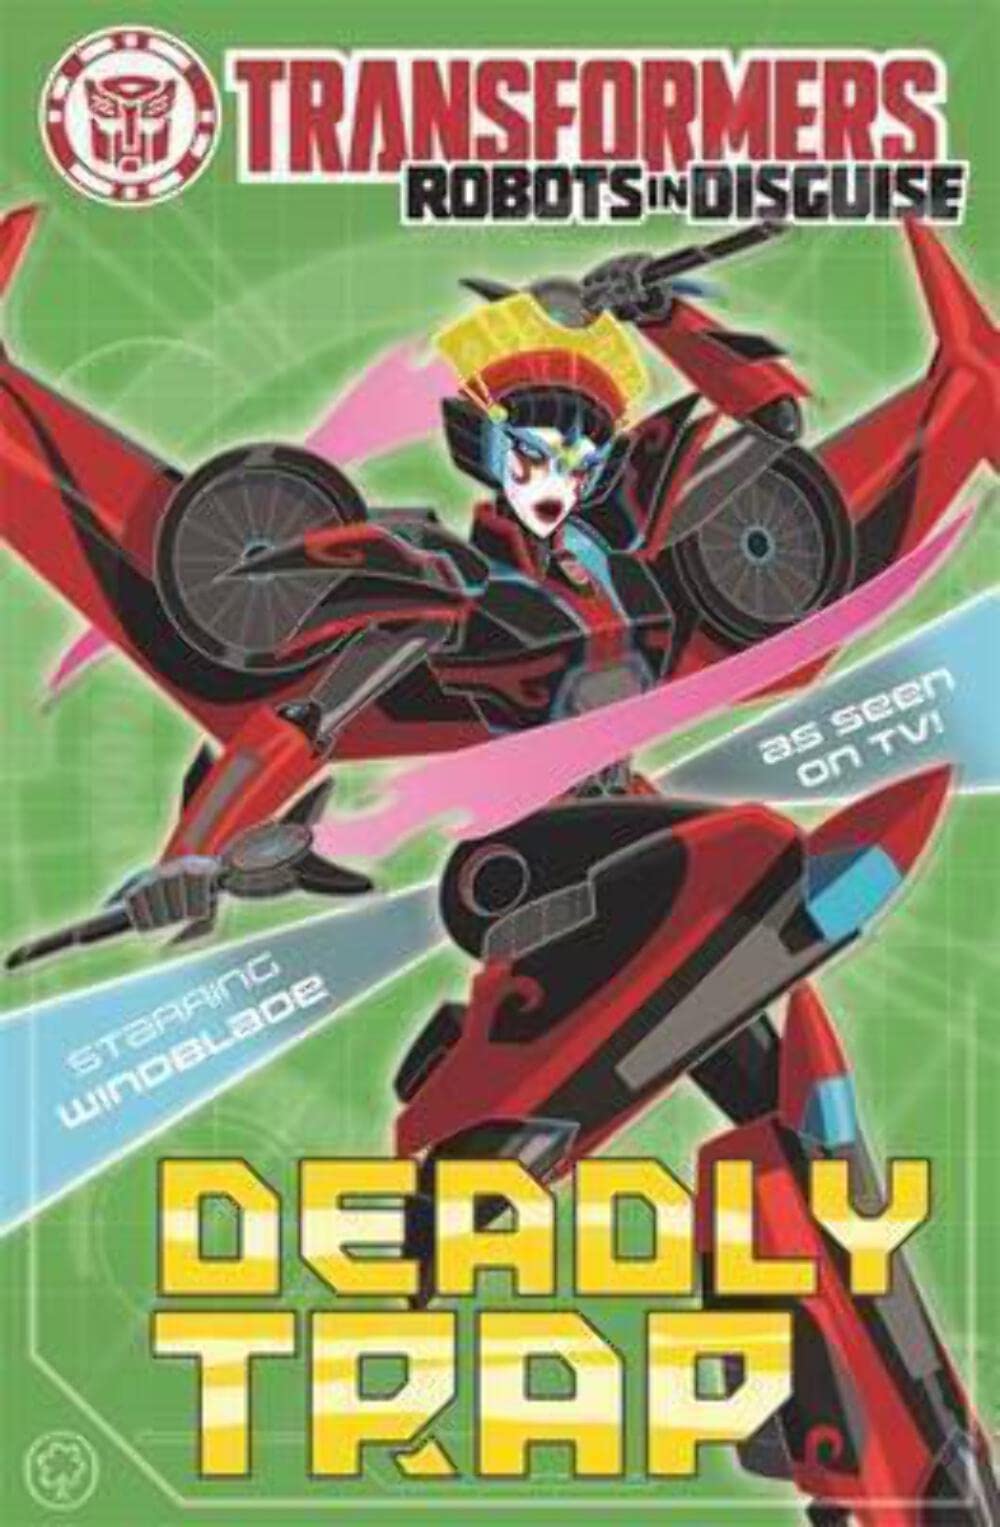 Transformers Robots in Disguise: Deadly Trap